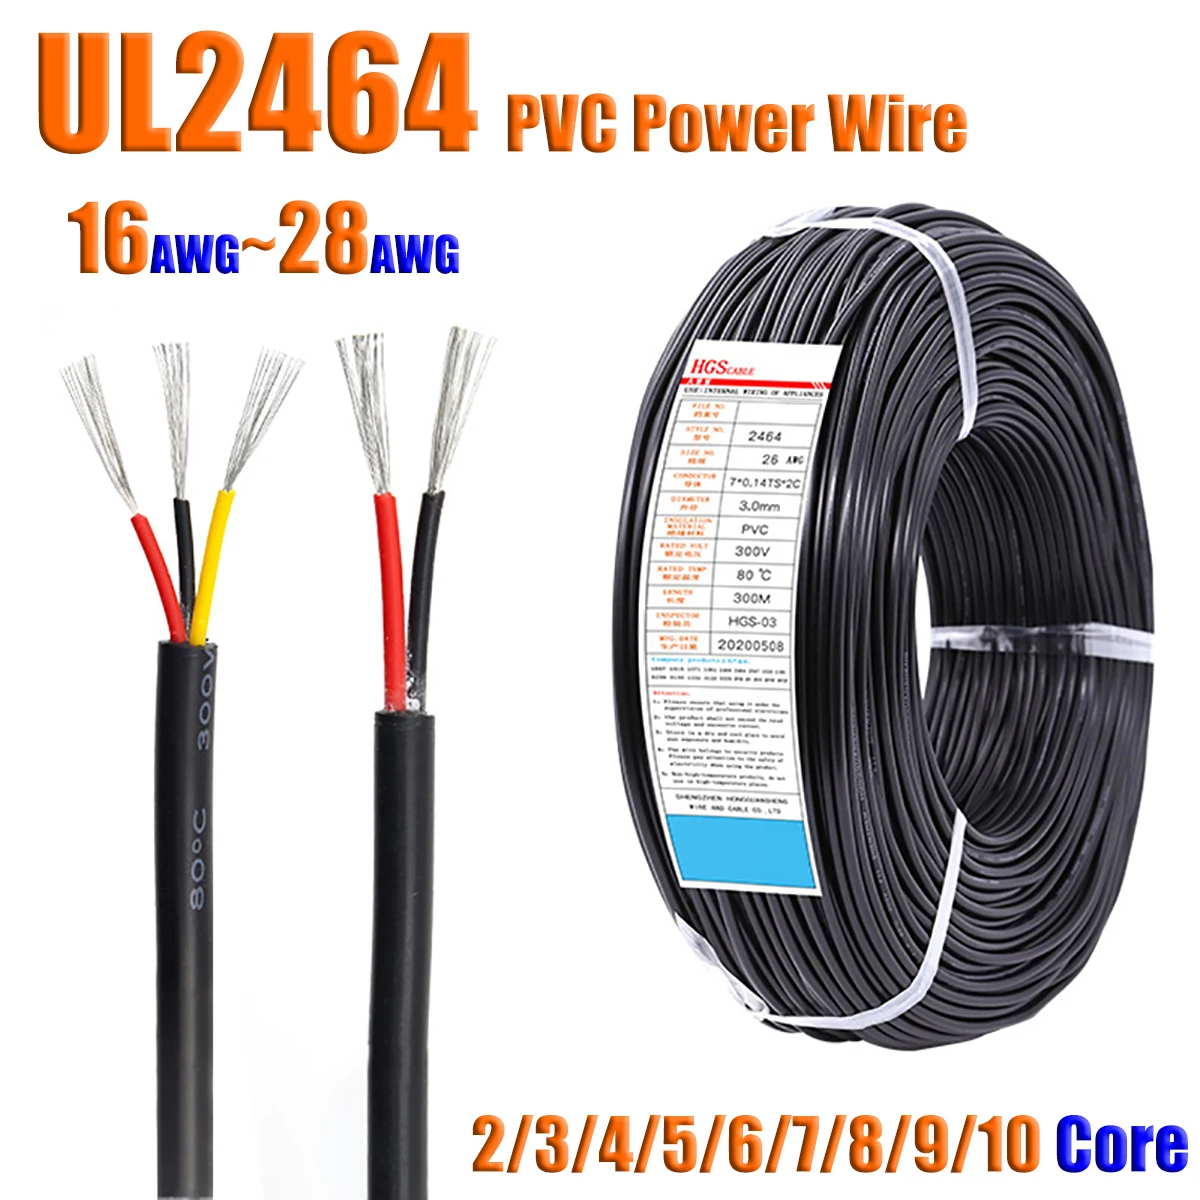 

UL2464 PVC Power Cable Signal Wire Tinned Copper 2/3/4/5/6/7/8/9/10 Core 16AWG 18AWG 20AWG 22AWG 24AWG 26AWG 28AWG